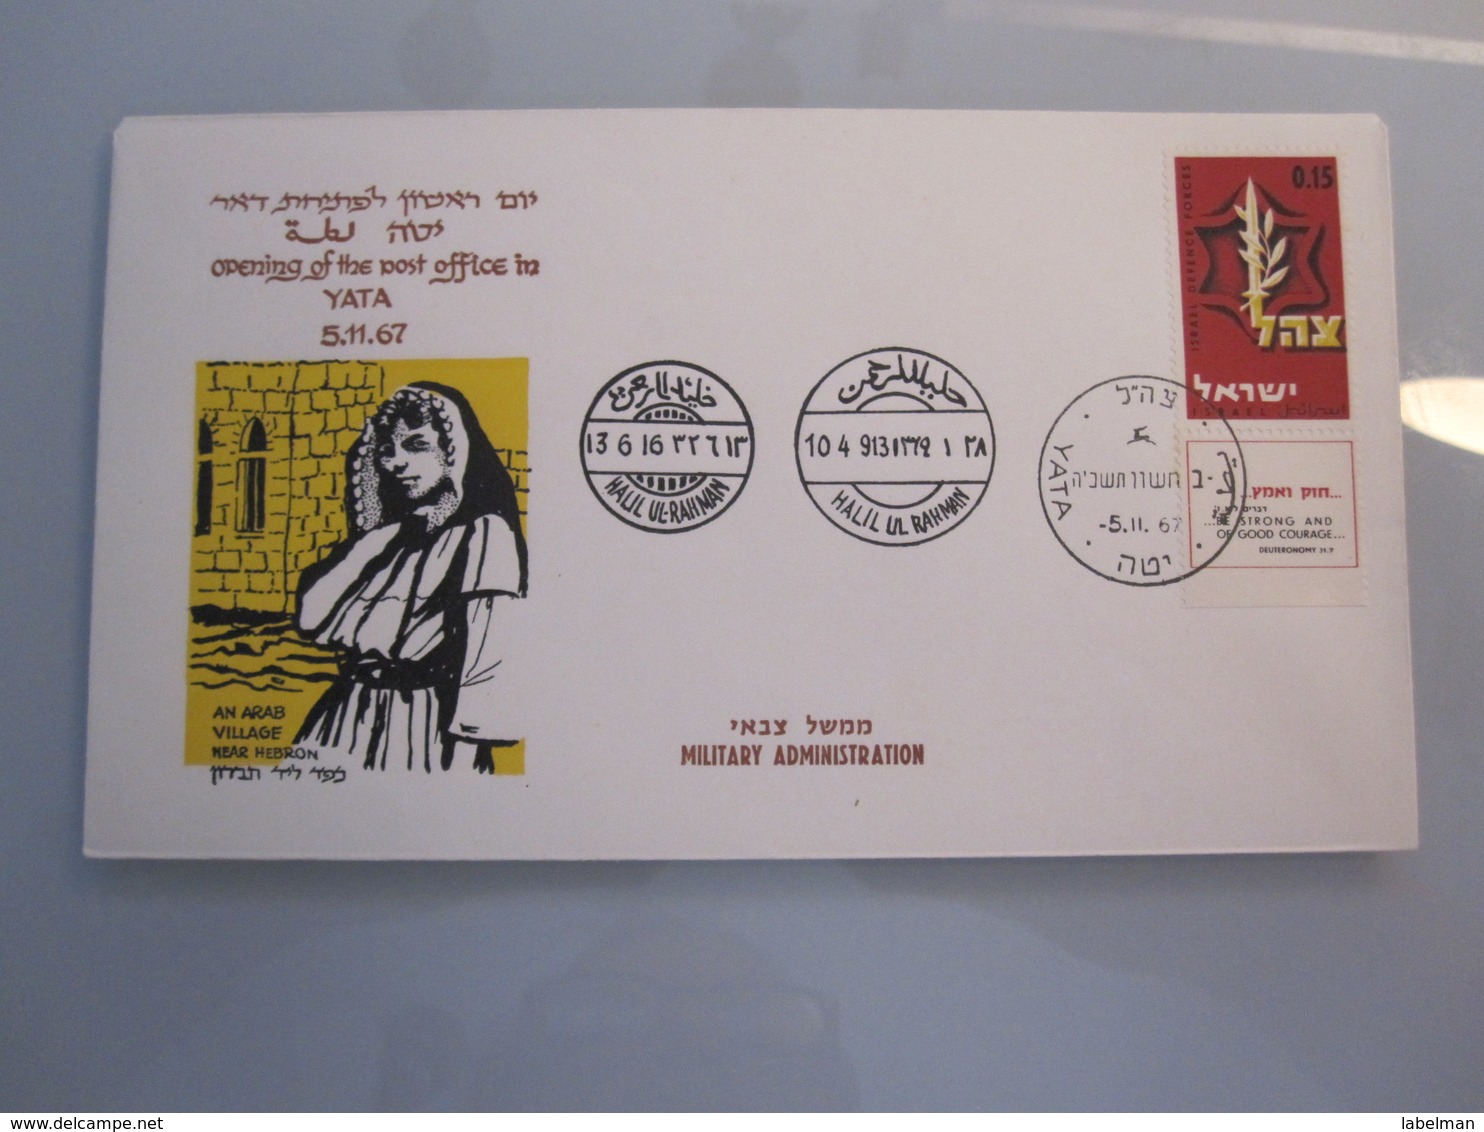 1967 POO FIRST DAY POST OFFICE OPENING MILITARY GOVERNMENT YATA HEBRON JORDAN PALESTINE 6 DAYS WAR COVER ISRAEL CACHET - Covers & Documents